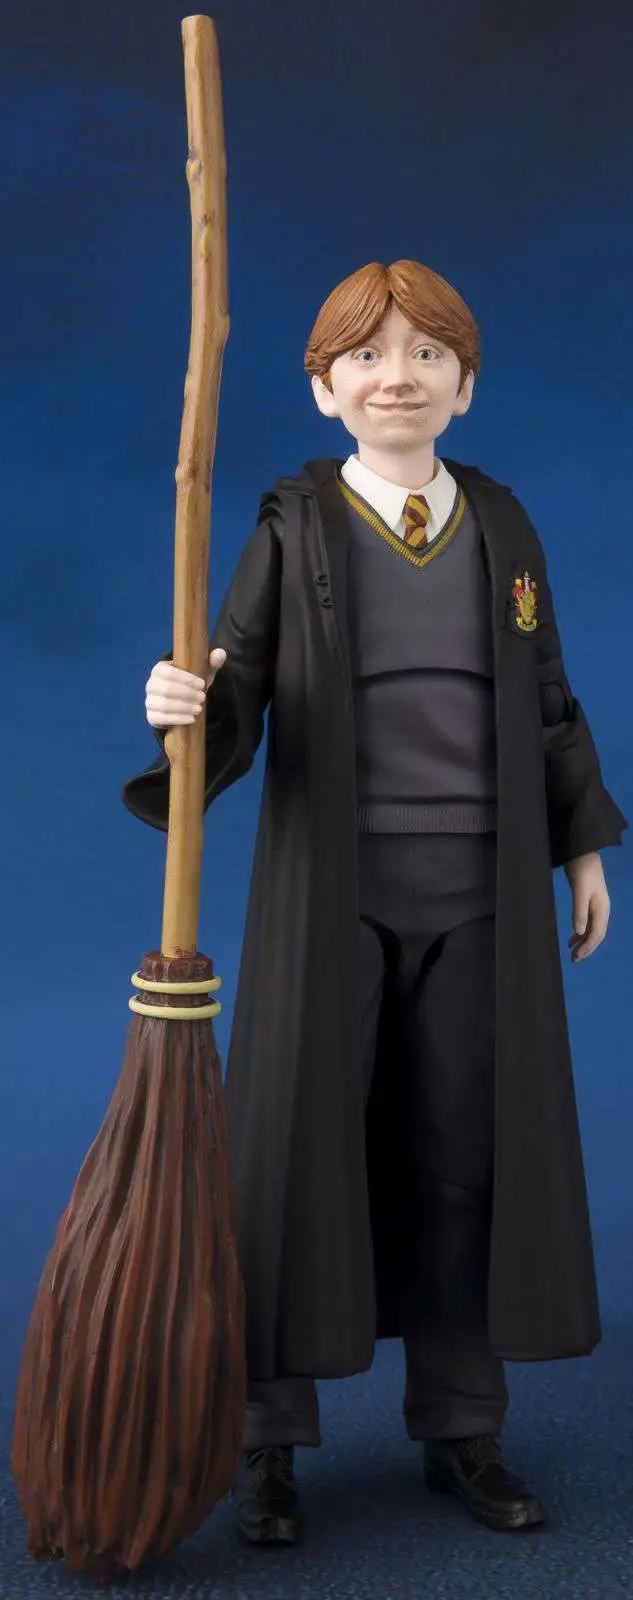 S.h.figuarts Harry Potter Stone Ron Weasley Bandai BAS55109 for sale online 